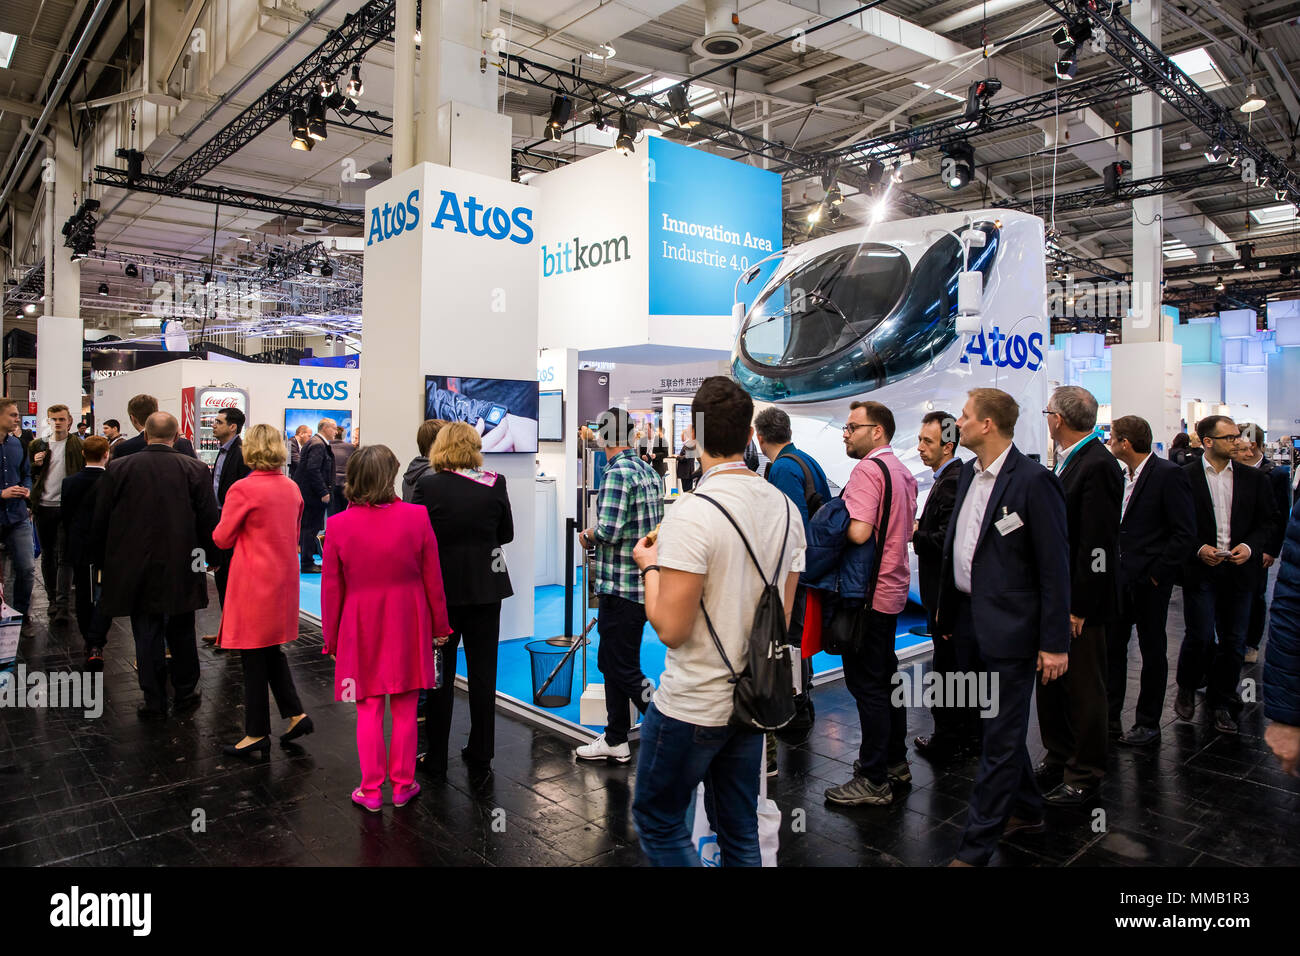 Hannover, Germany - April, 2018: Atos Bitkom booth stand on Messe fair in Hannover, Germany Stock Photo